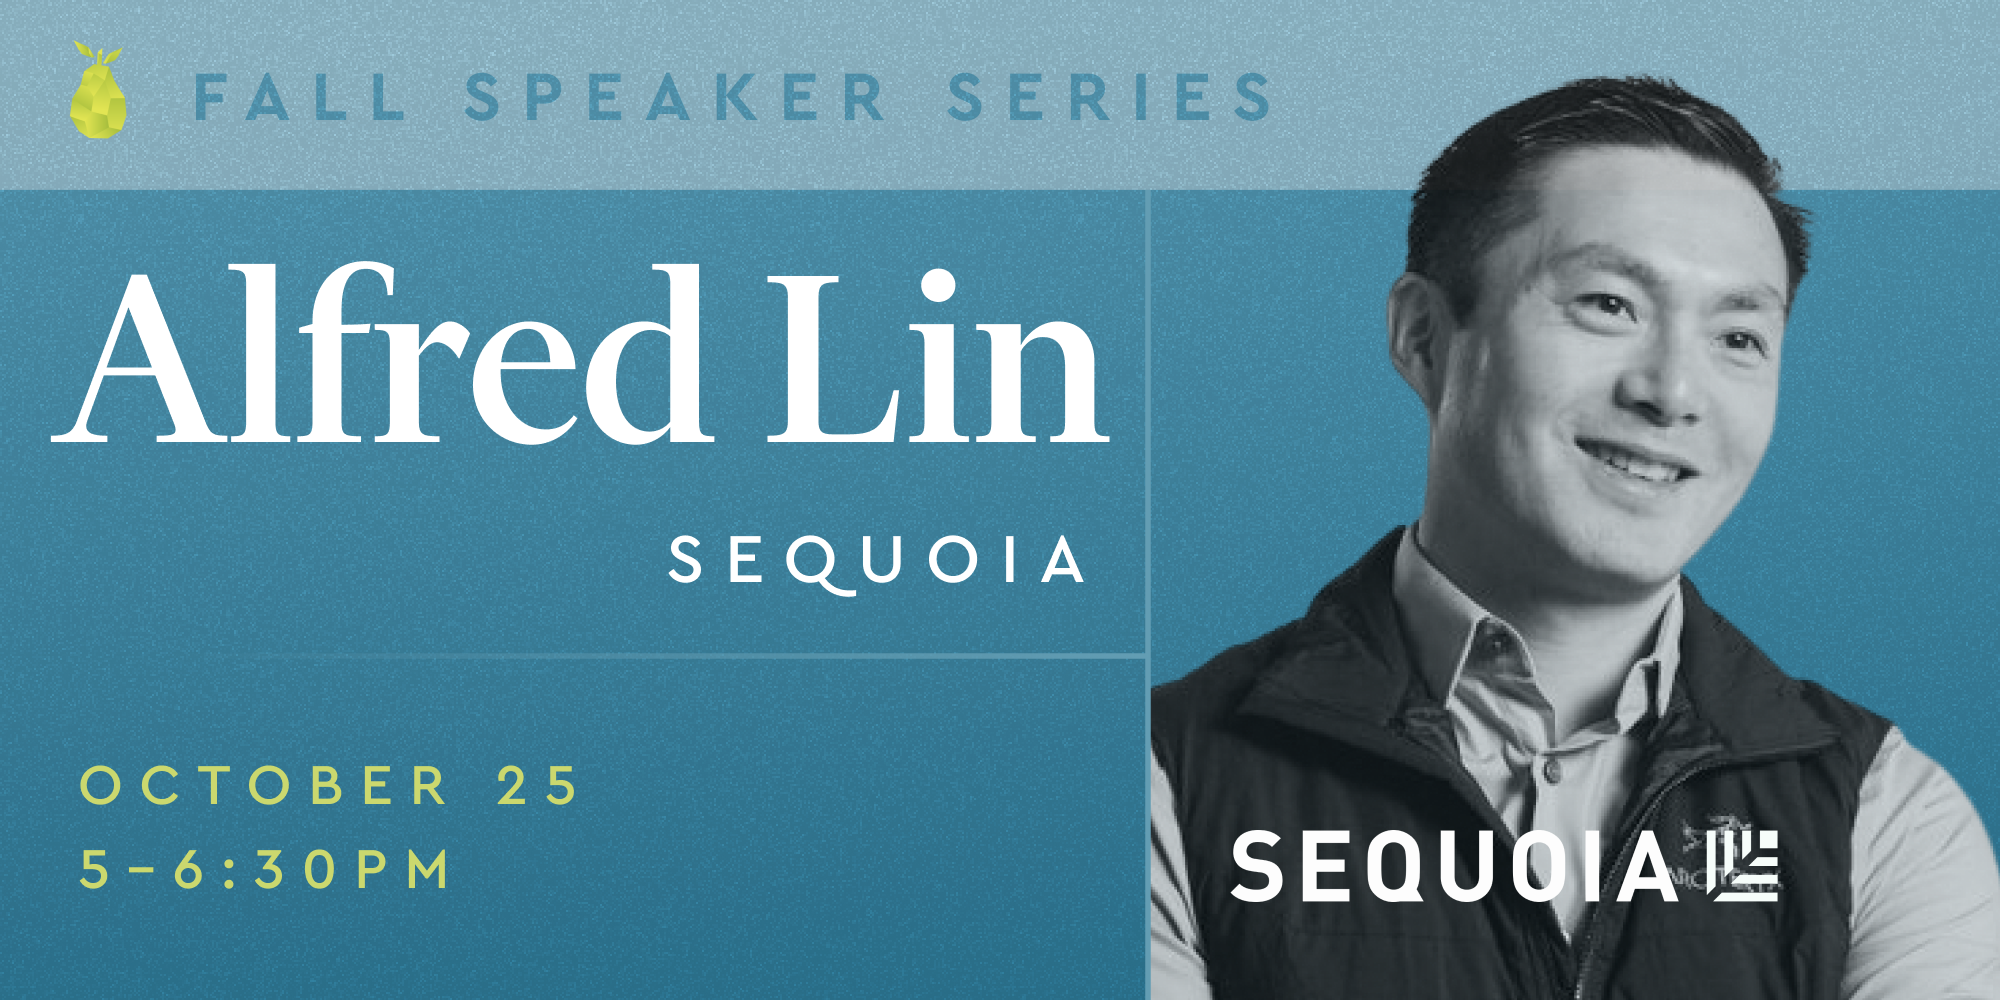 resources Pear Speaker Series: Fireside Chat with Alfred Lin of Sequoia Capital